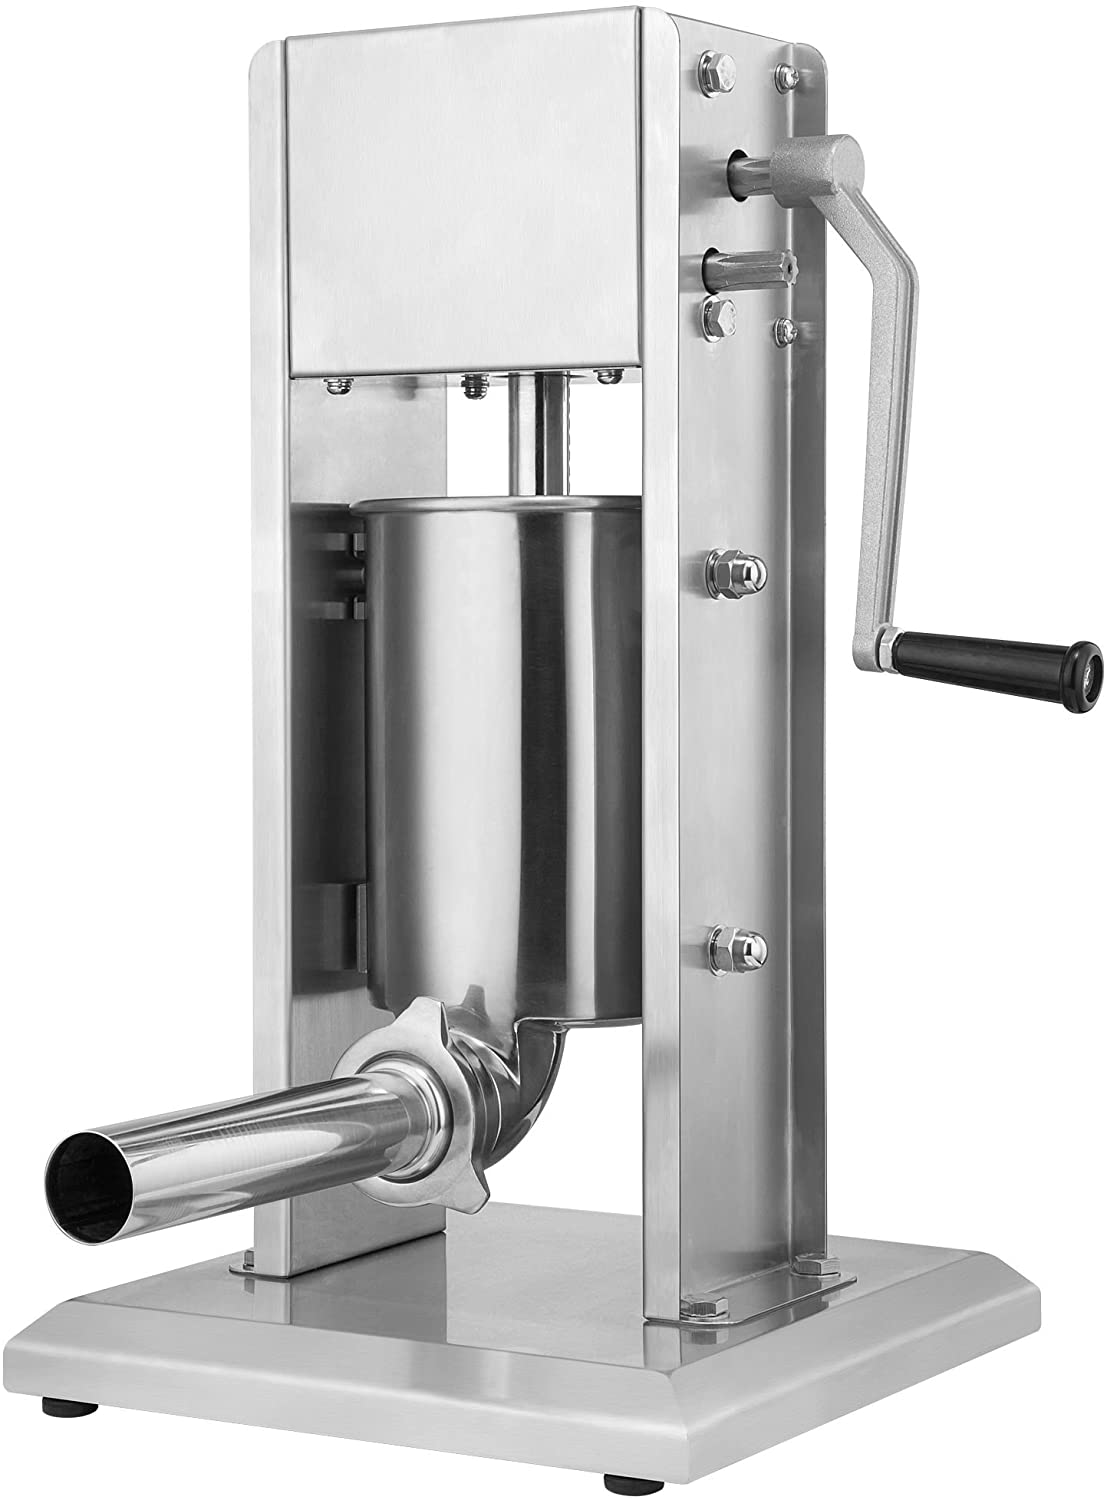 Zelsius professional sausage filling machine made of stainless steel + four different filling pipes, sausage filler, sausage press with 2-speed gearbox, ventilation valve and hand crank, Silver